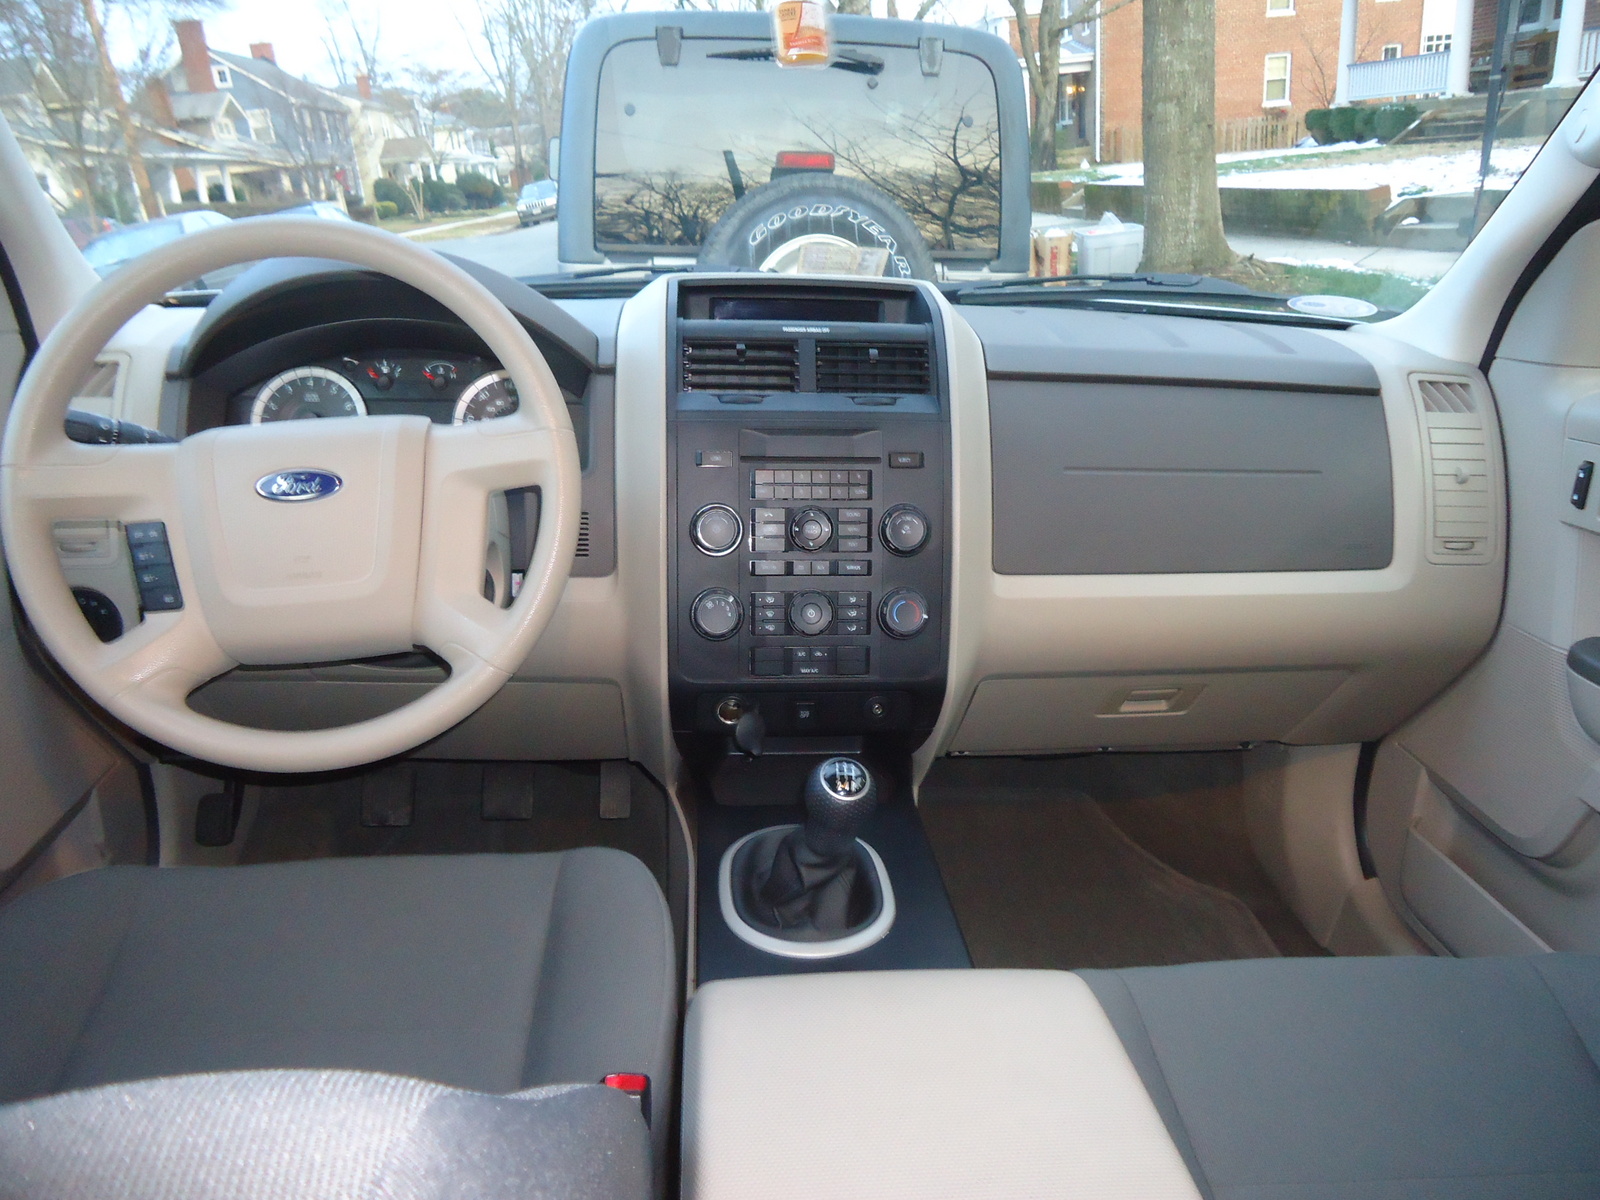 Ford escape stability control system